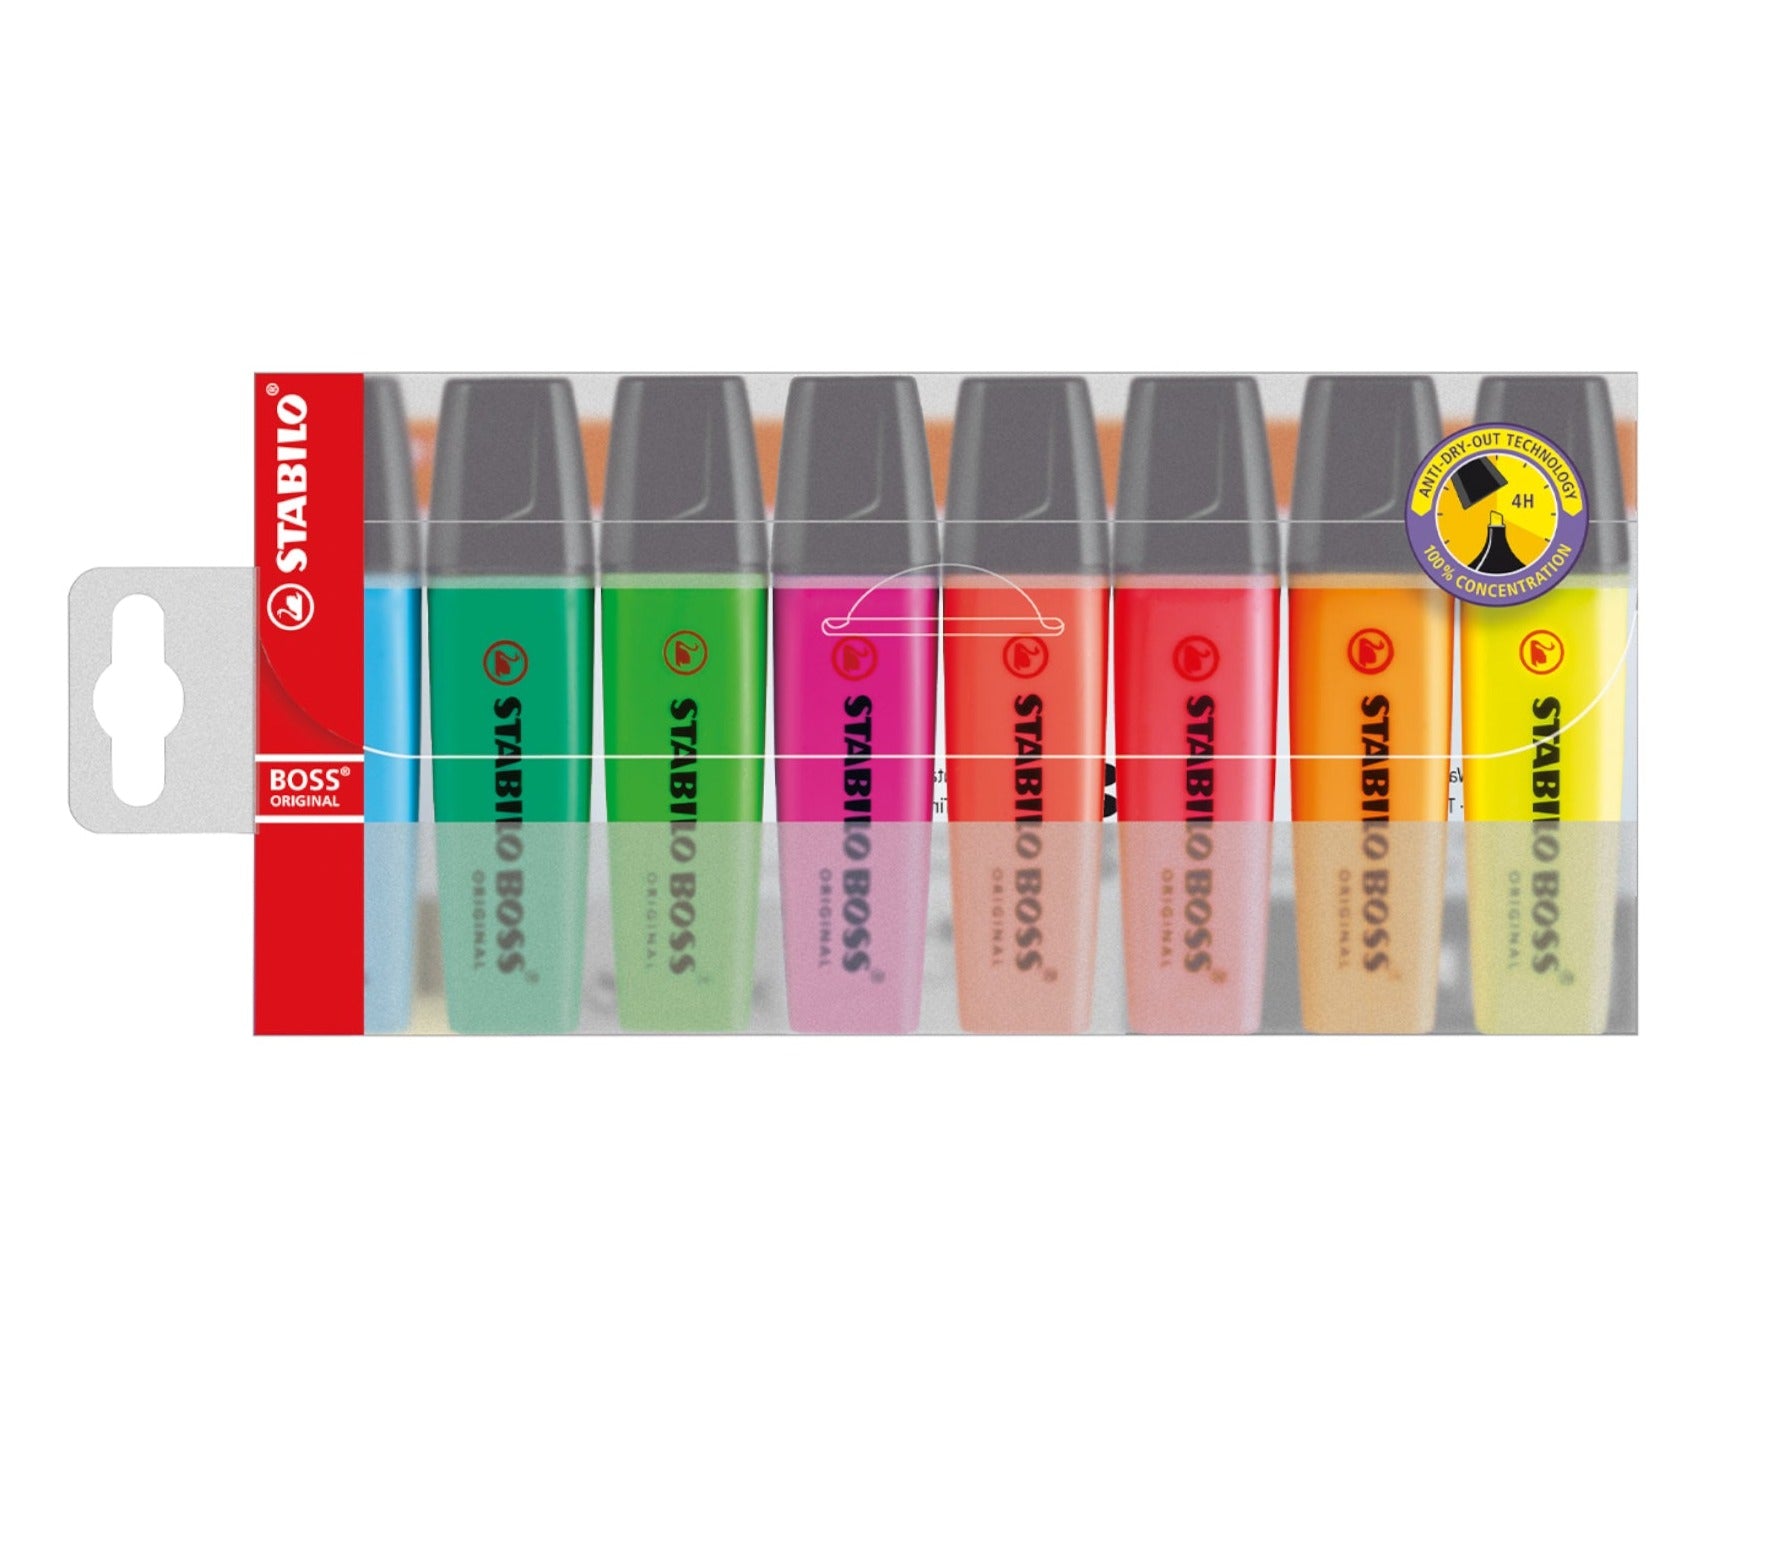 STABILO BOSS Original Highlighter Pen and Text Marker- Set of 8 - Schwan-STABILO -Most colourful Stationery Shop